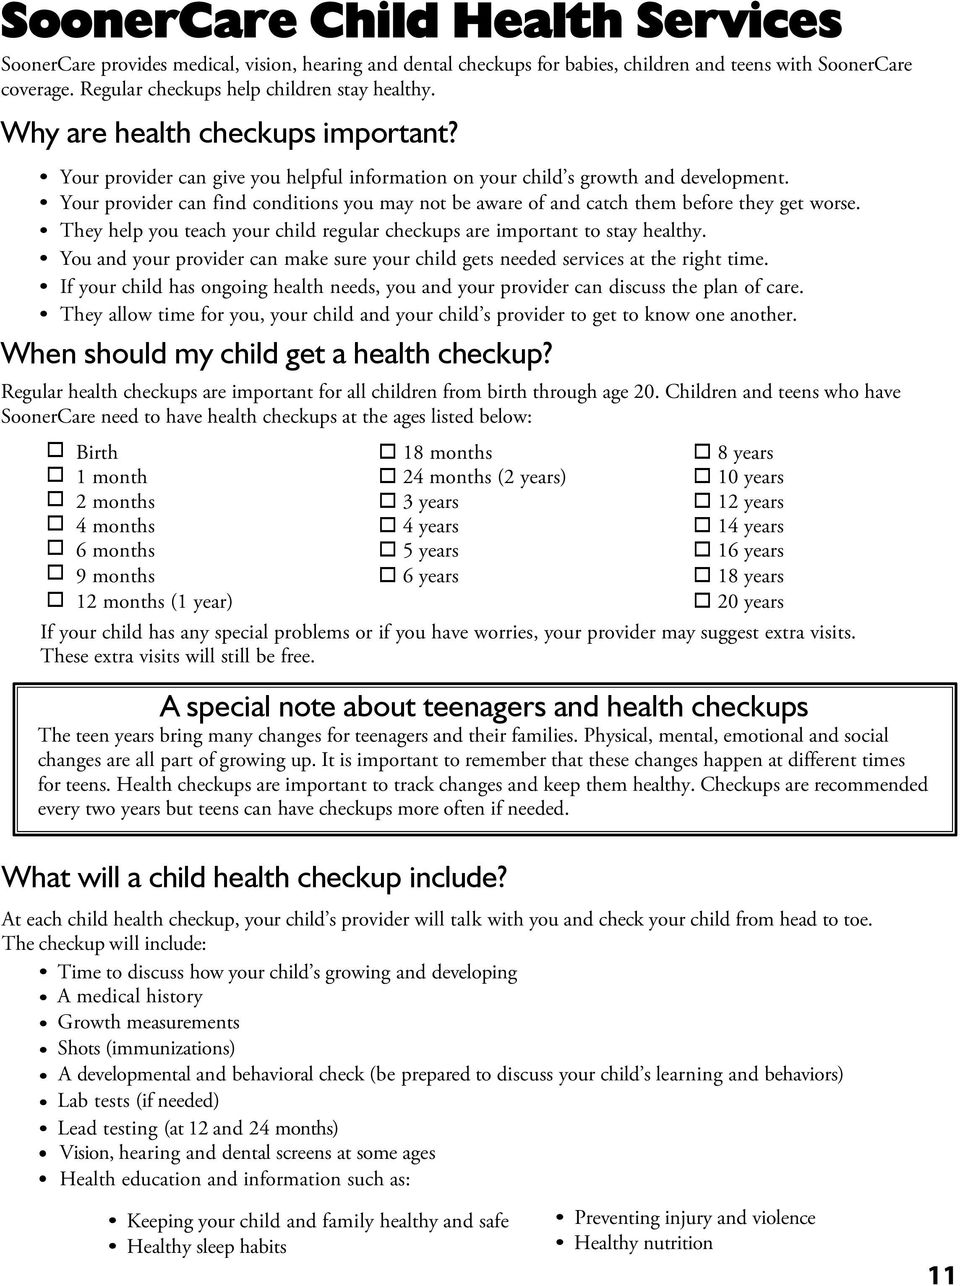 Your provider can find conditions you may not be aware of and catch them before they get worse. They help you teach your child regular checkups are important to stay healthy.